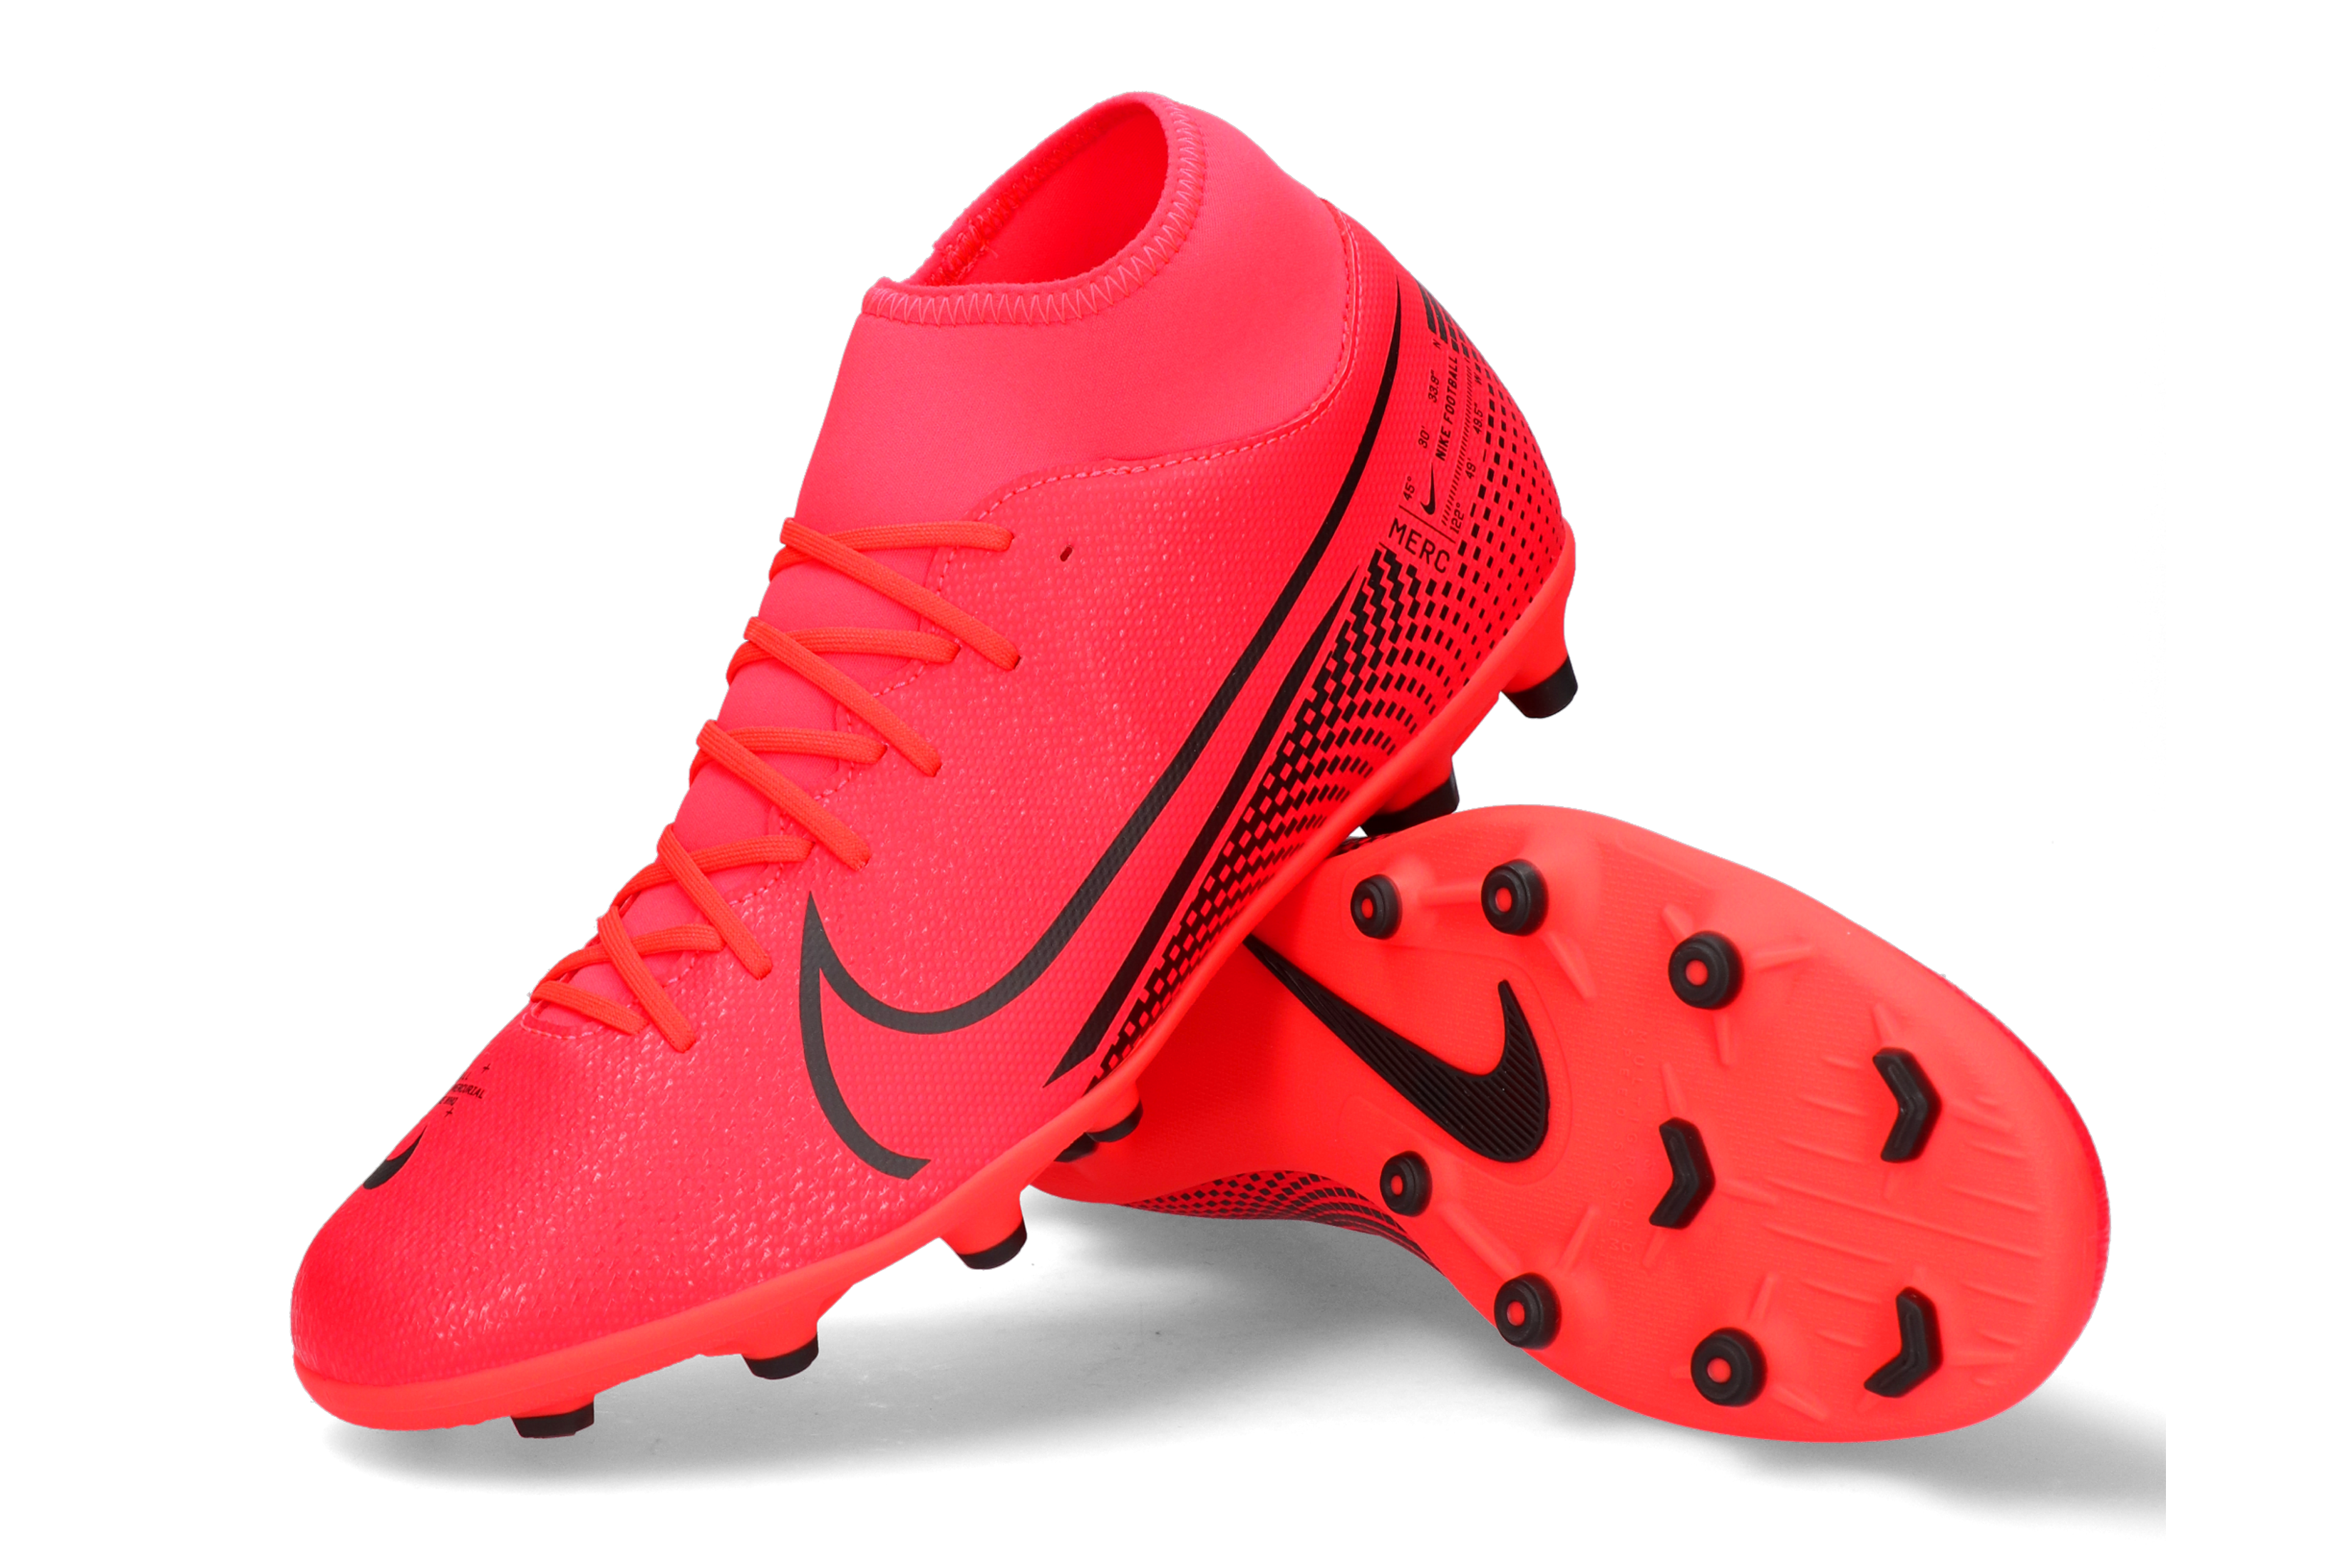 NIKE MEN 'S SUPERFLY 6 CLUB MG SOCCER CLEAT.